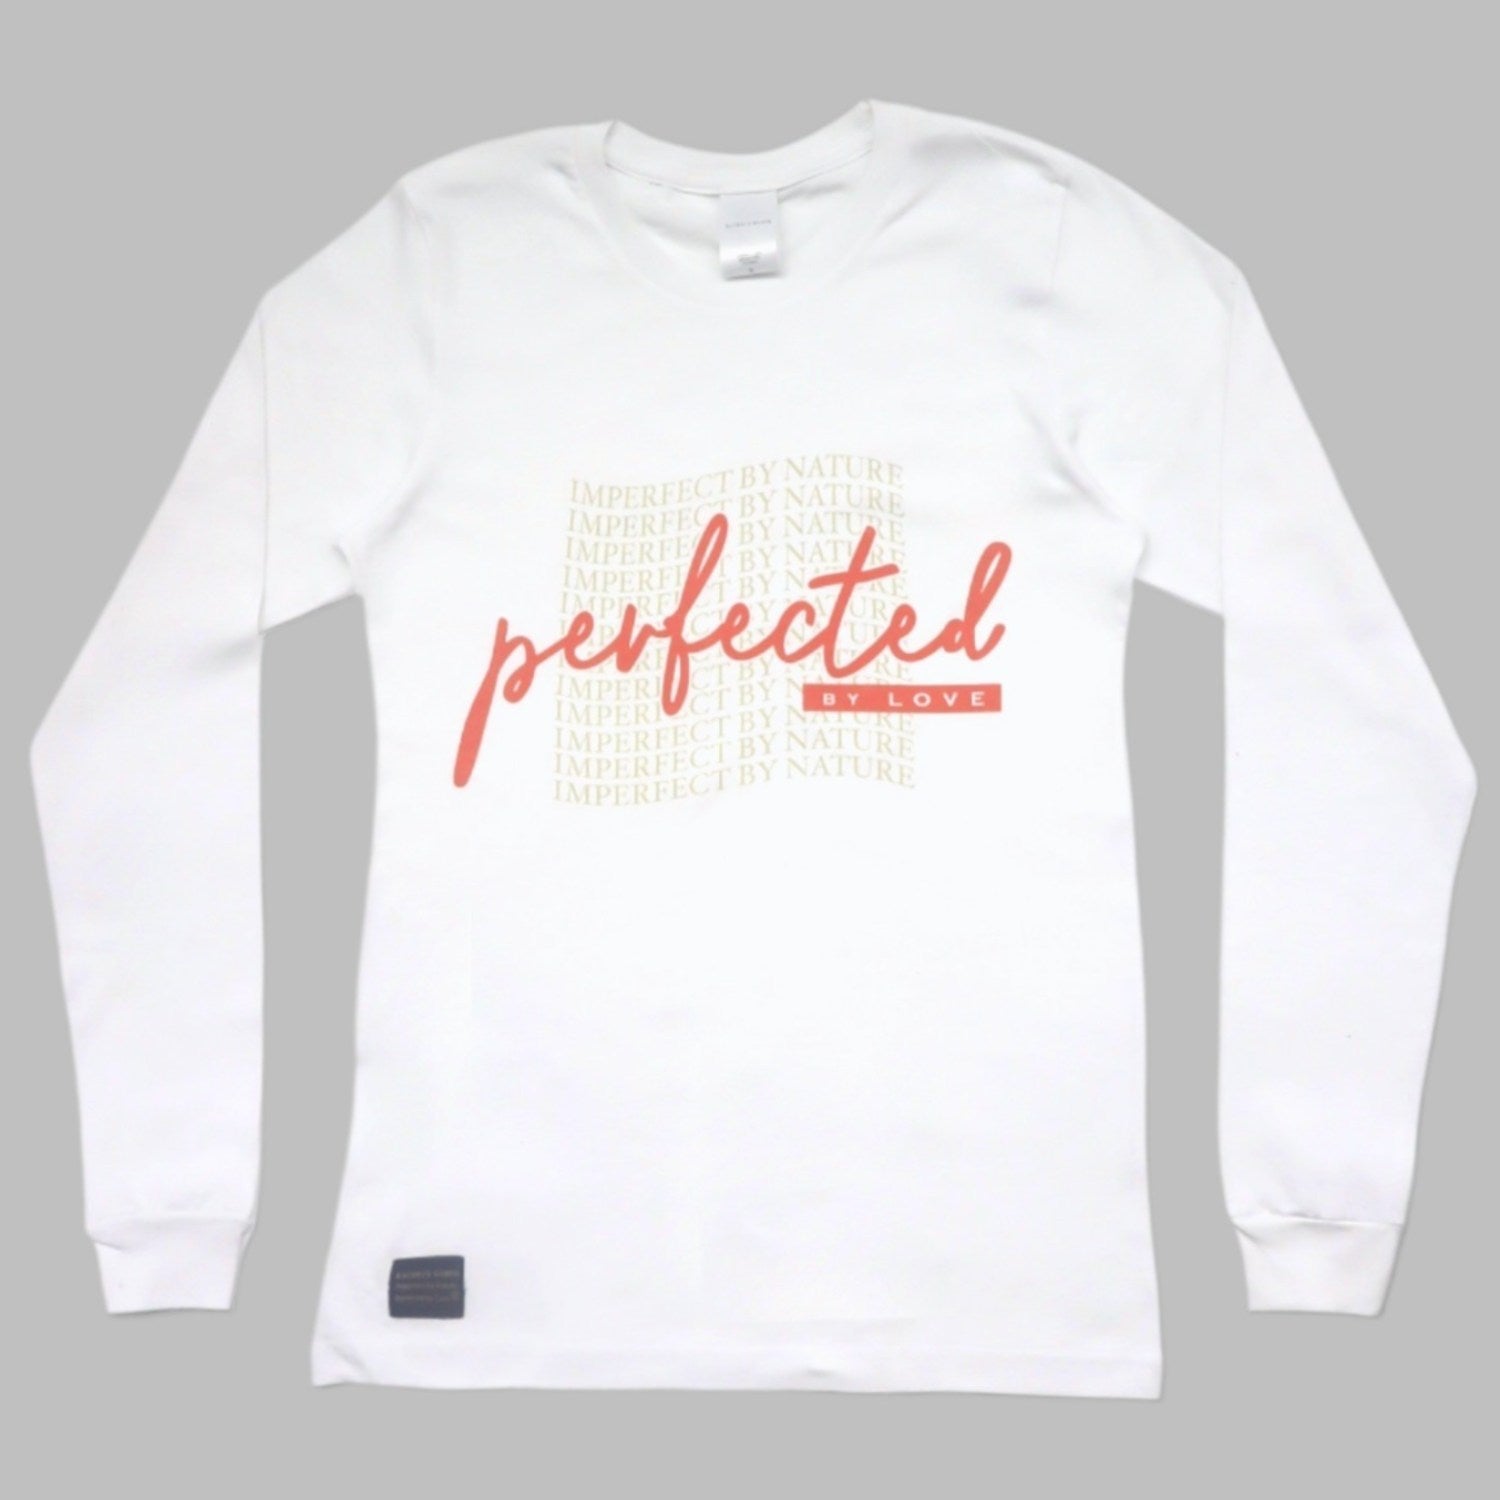 Wave Perfected by Love White Long Sleeve Tee